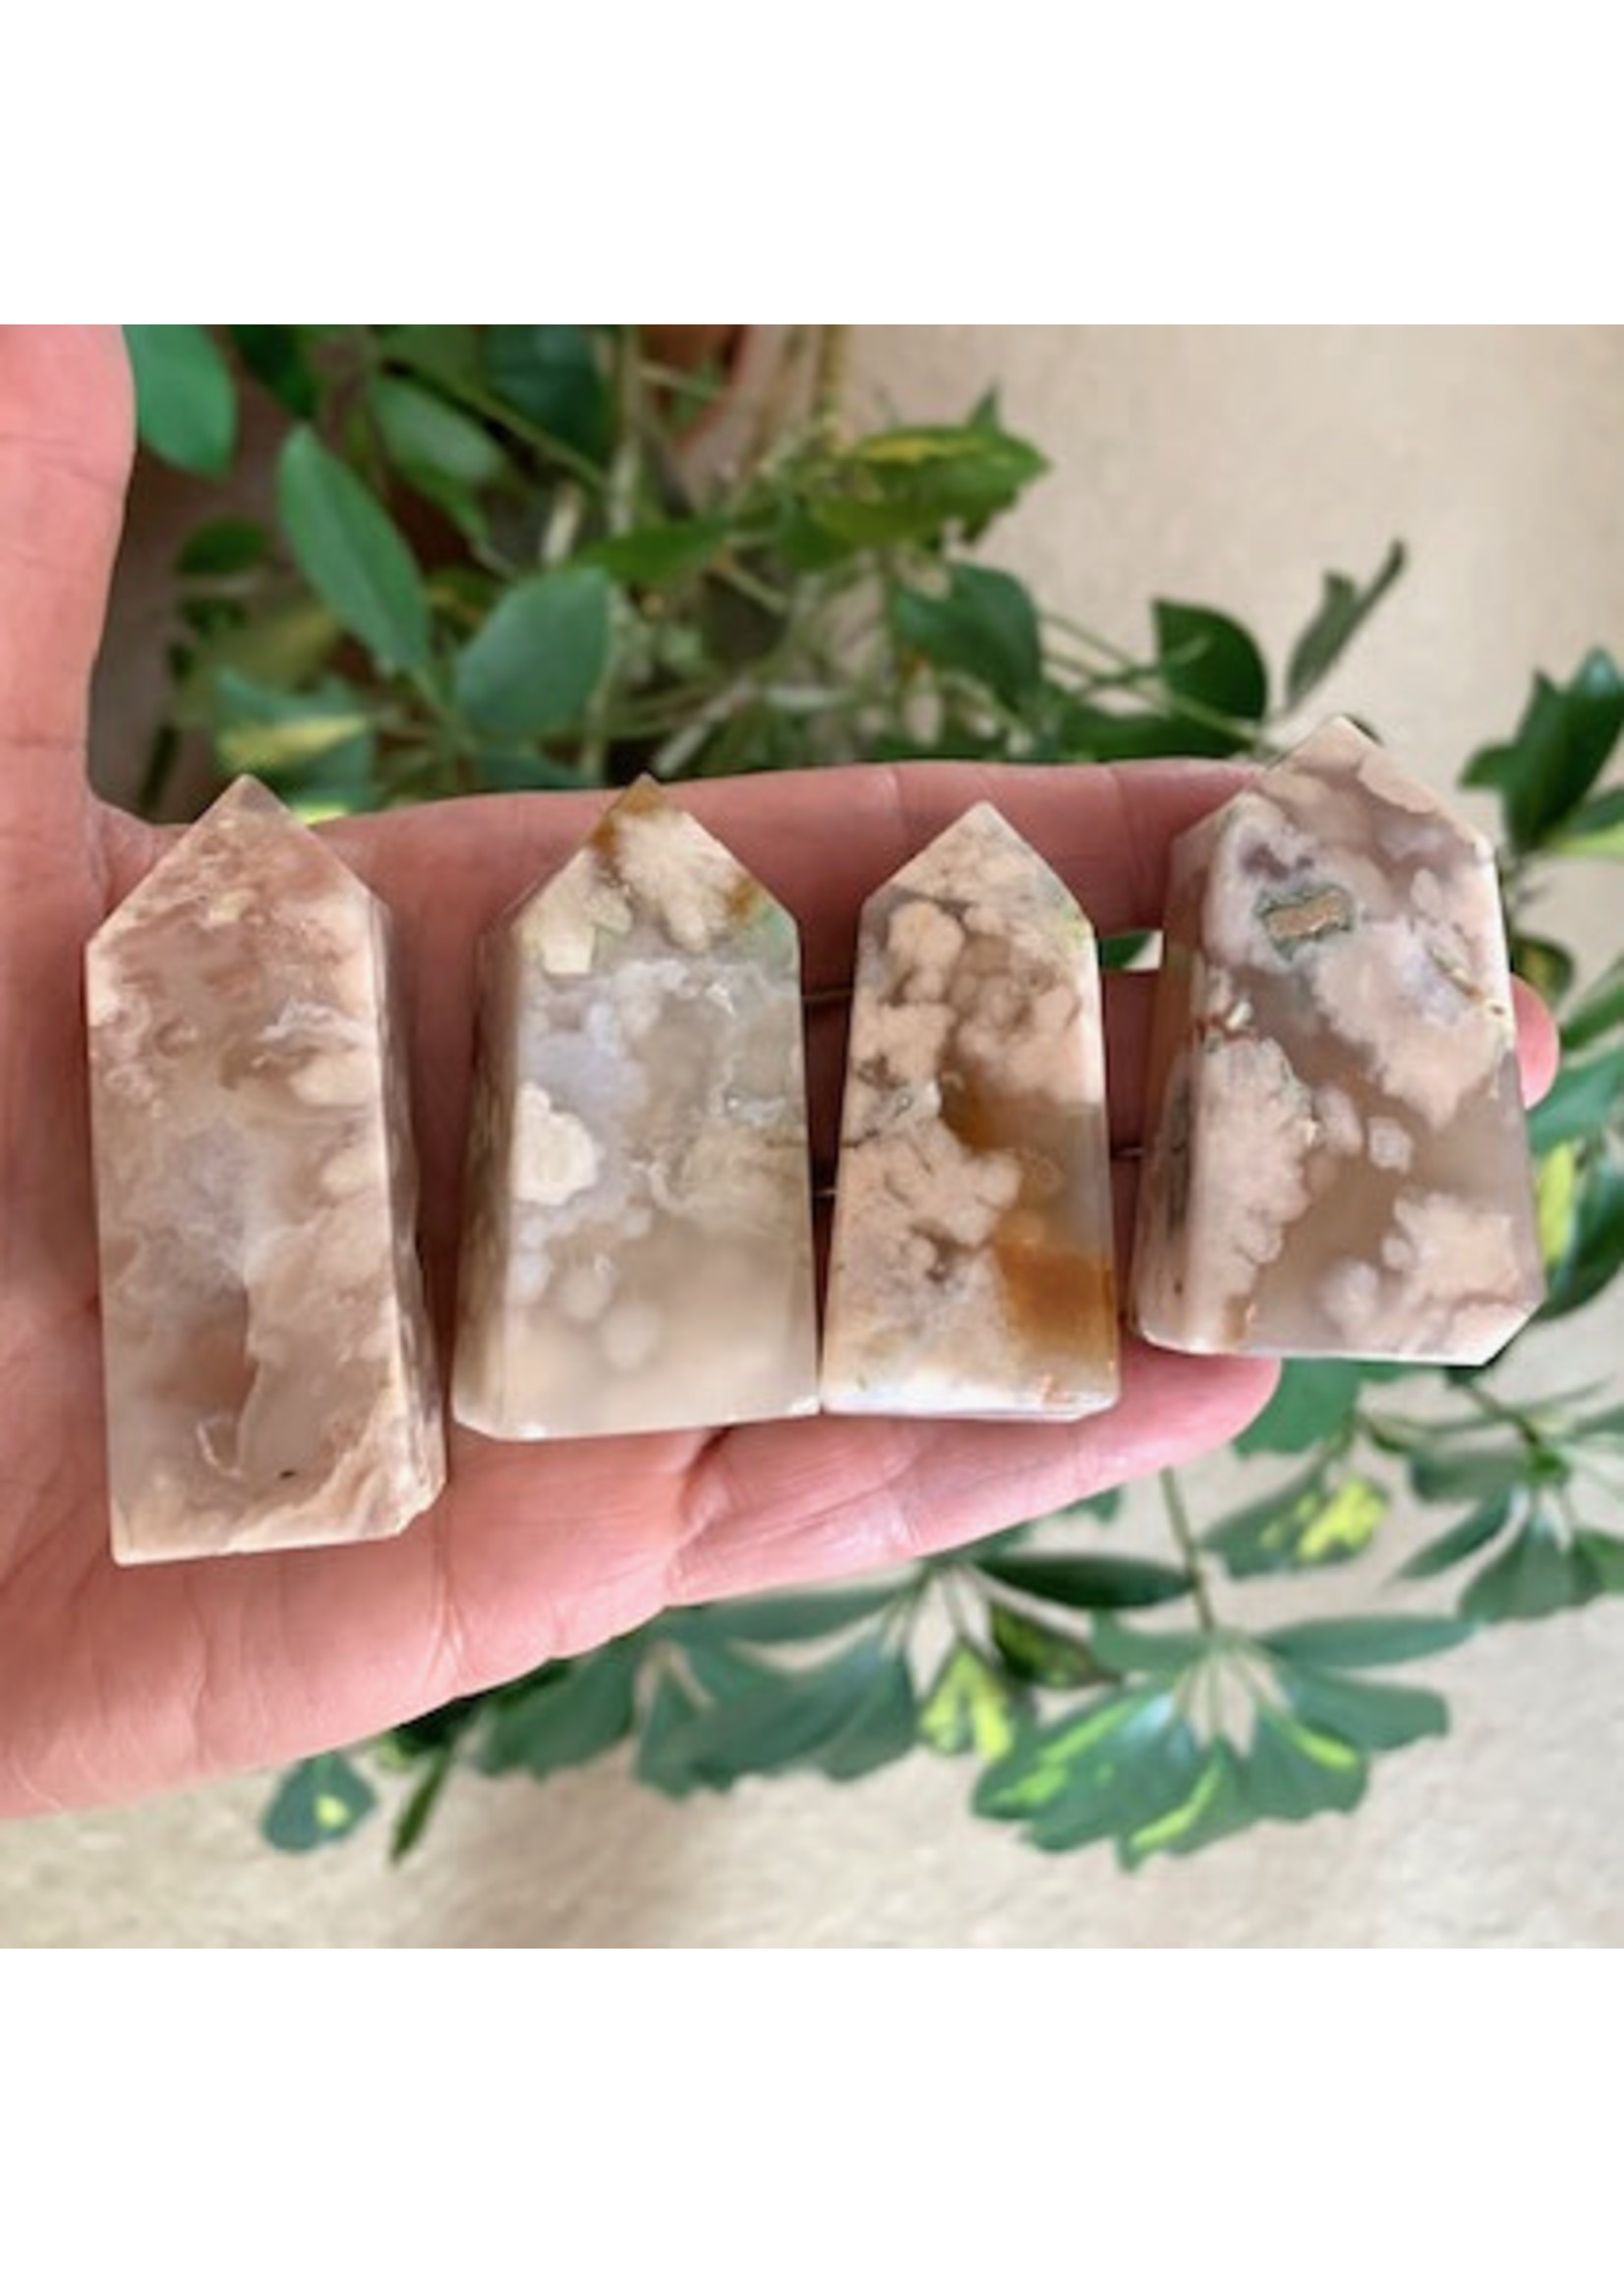 Flower Agate Obelisks for blossoming into your true self